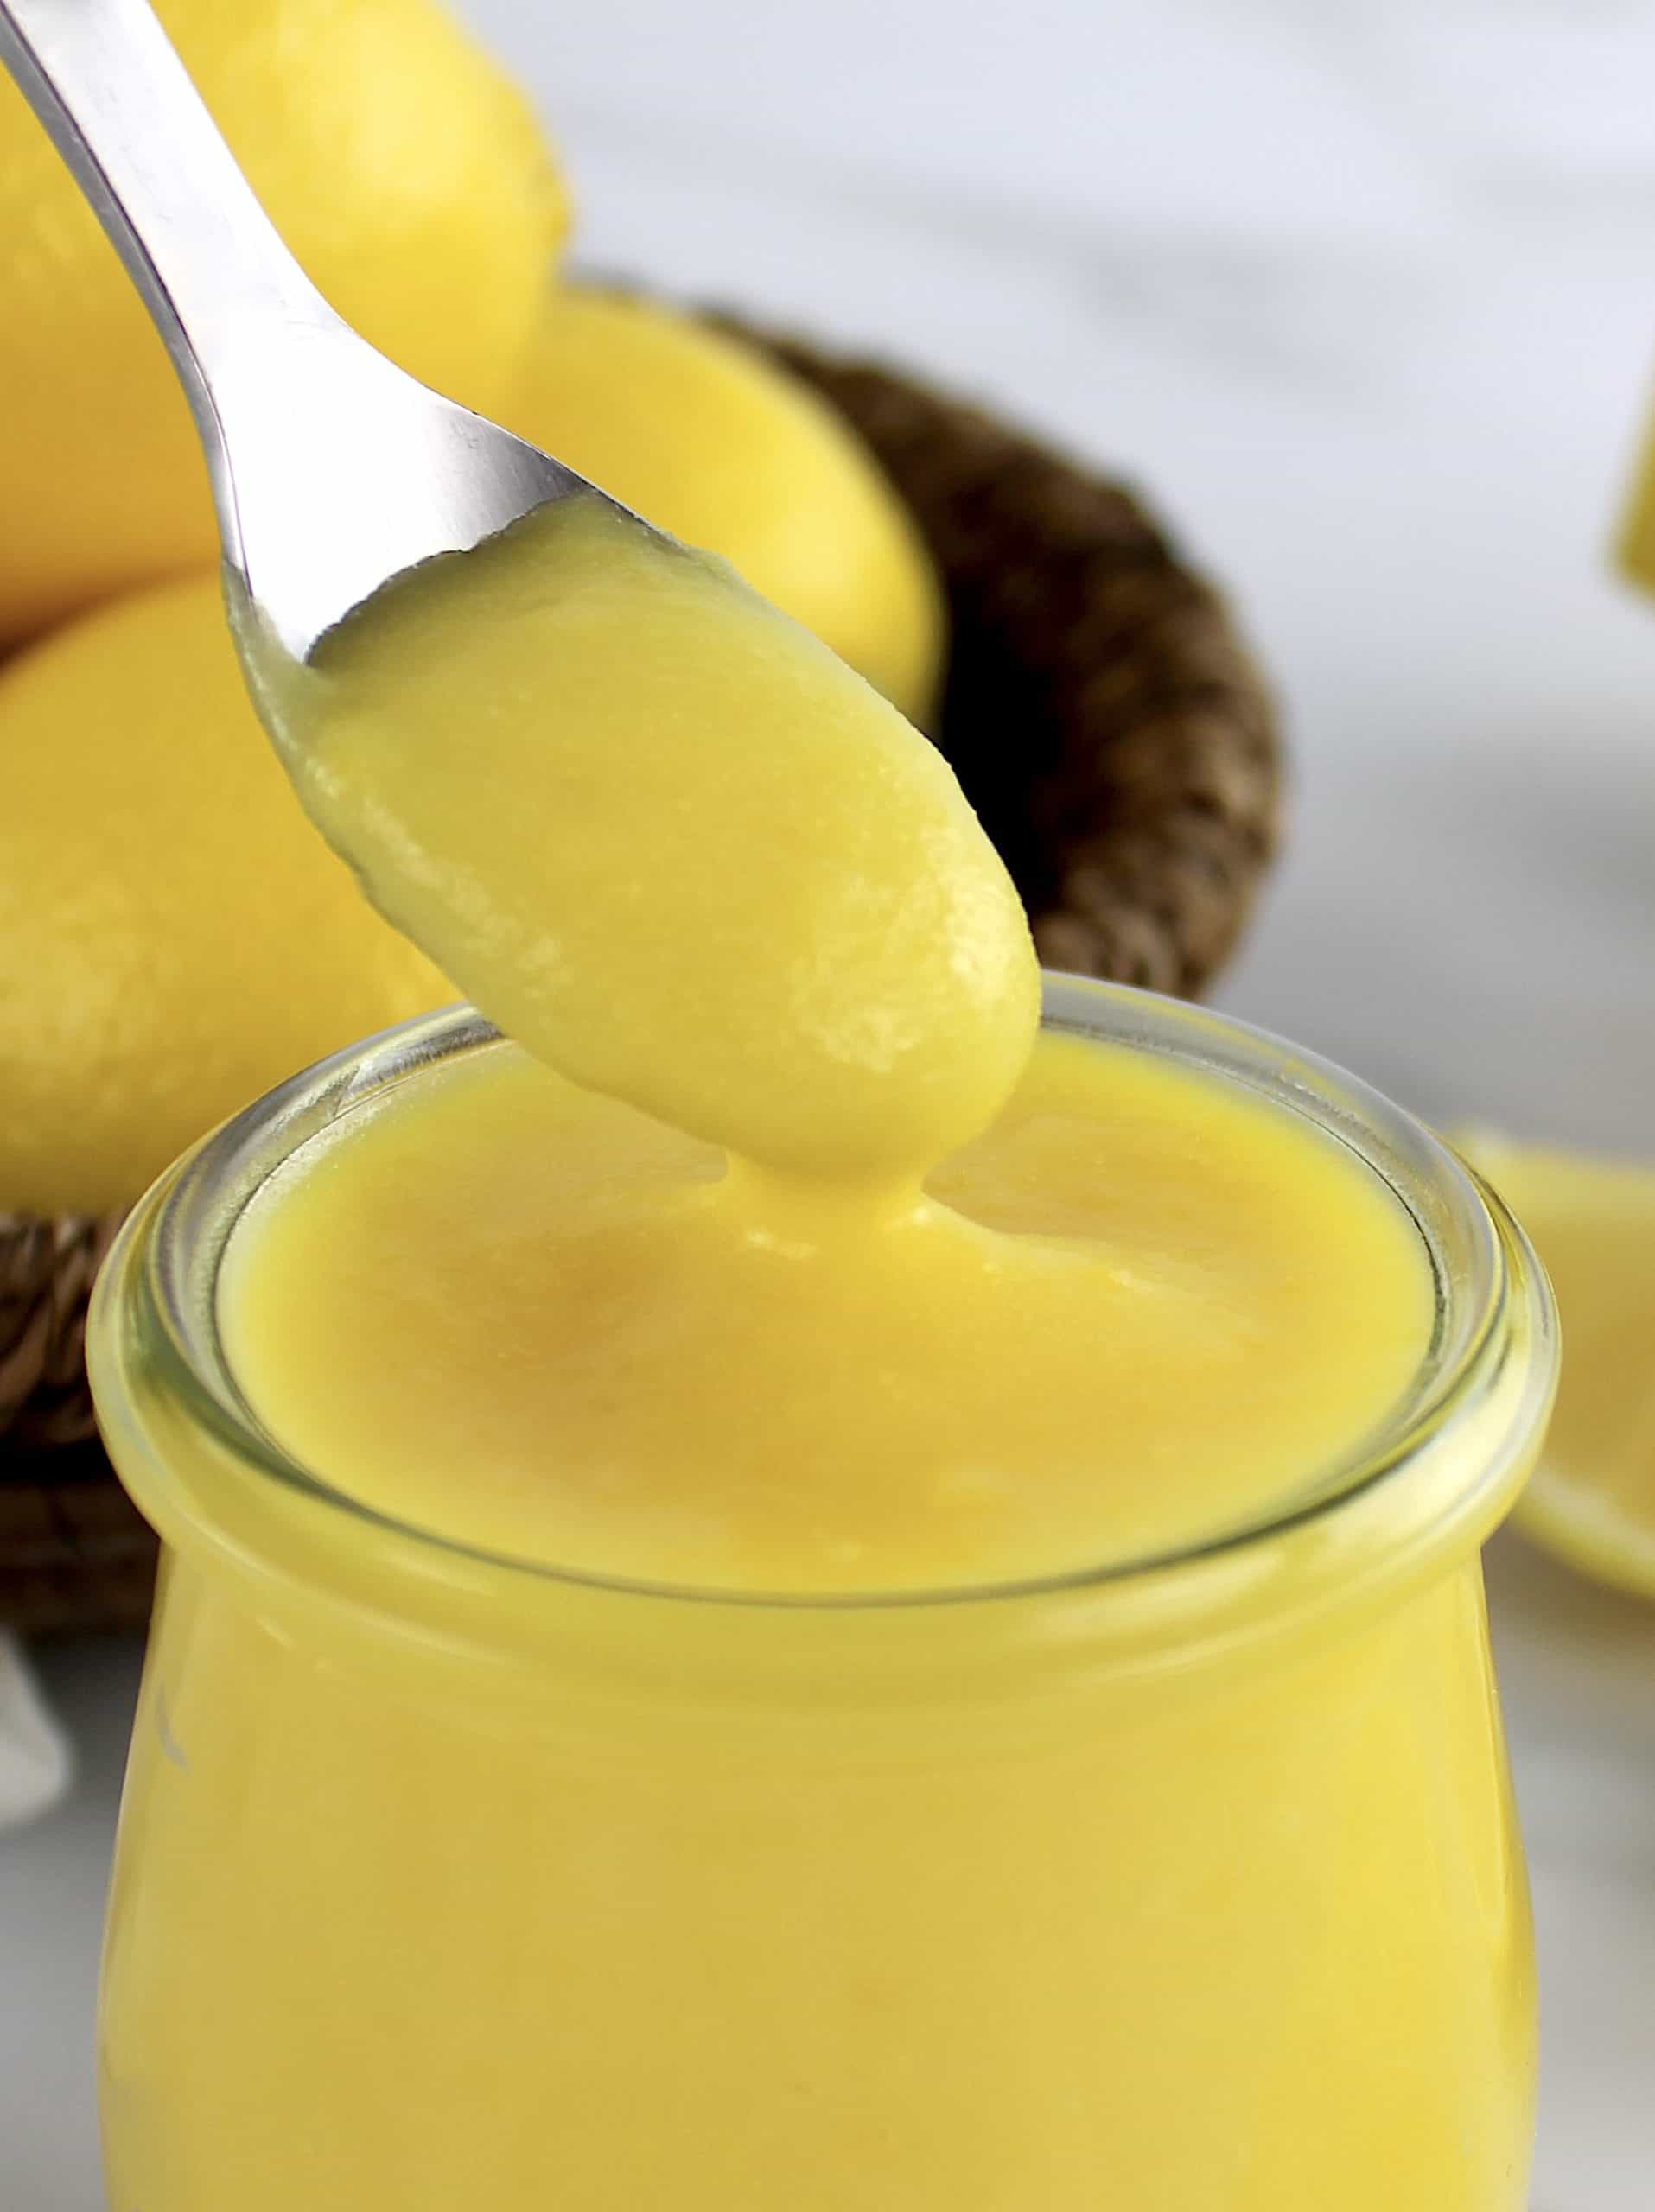 5 Minute Keto Lemon Curd in open glass jar with spoon holding up some